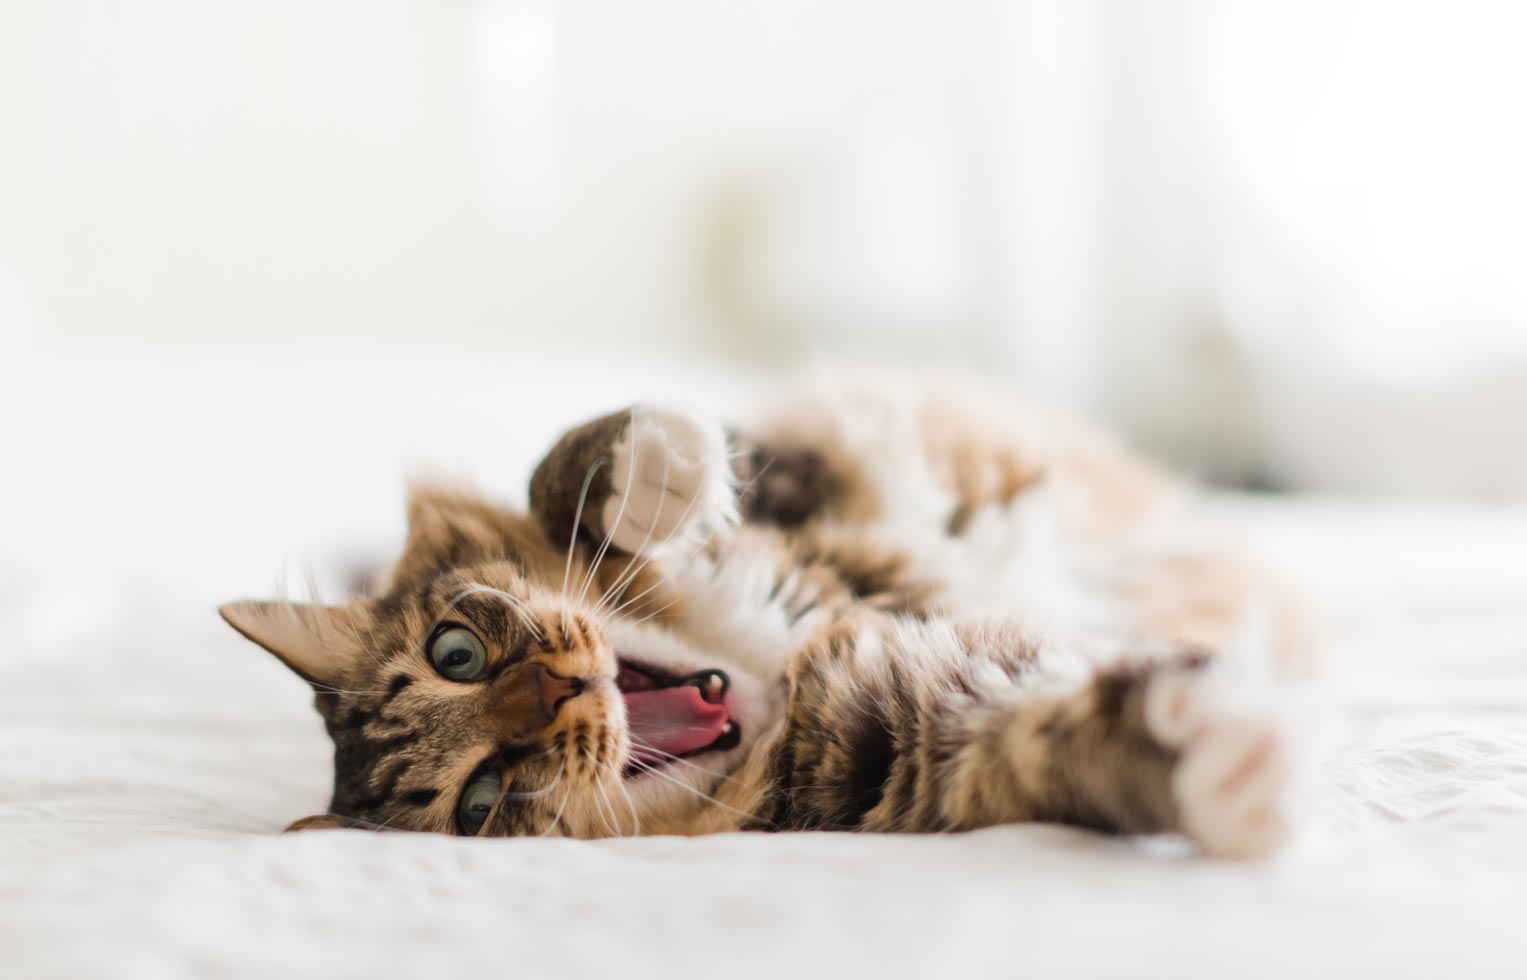 Learn about cat biting and what to do.